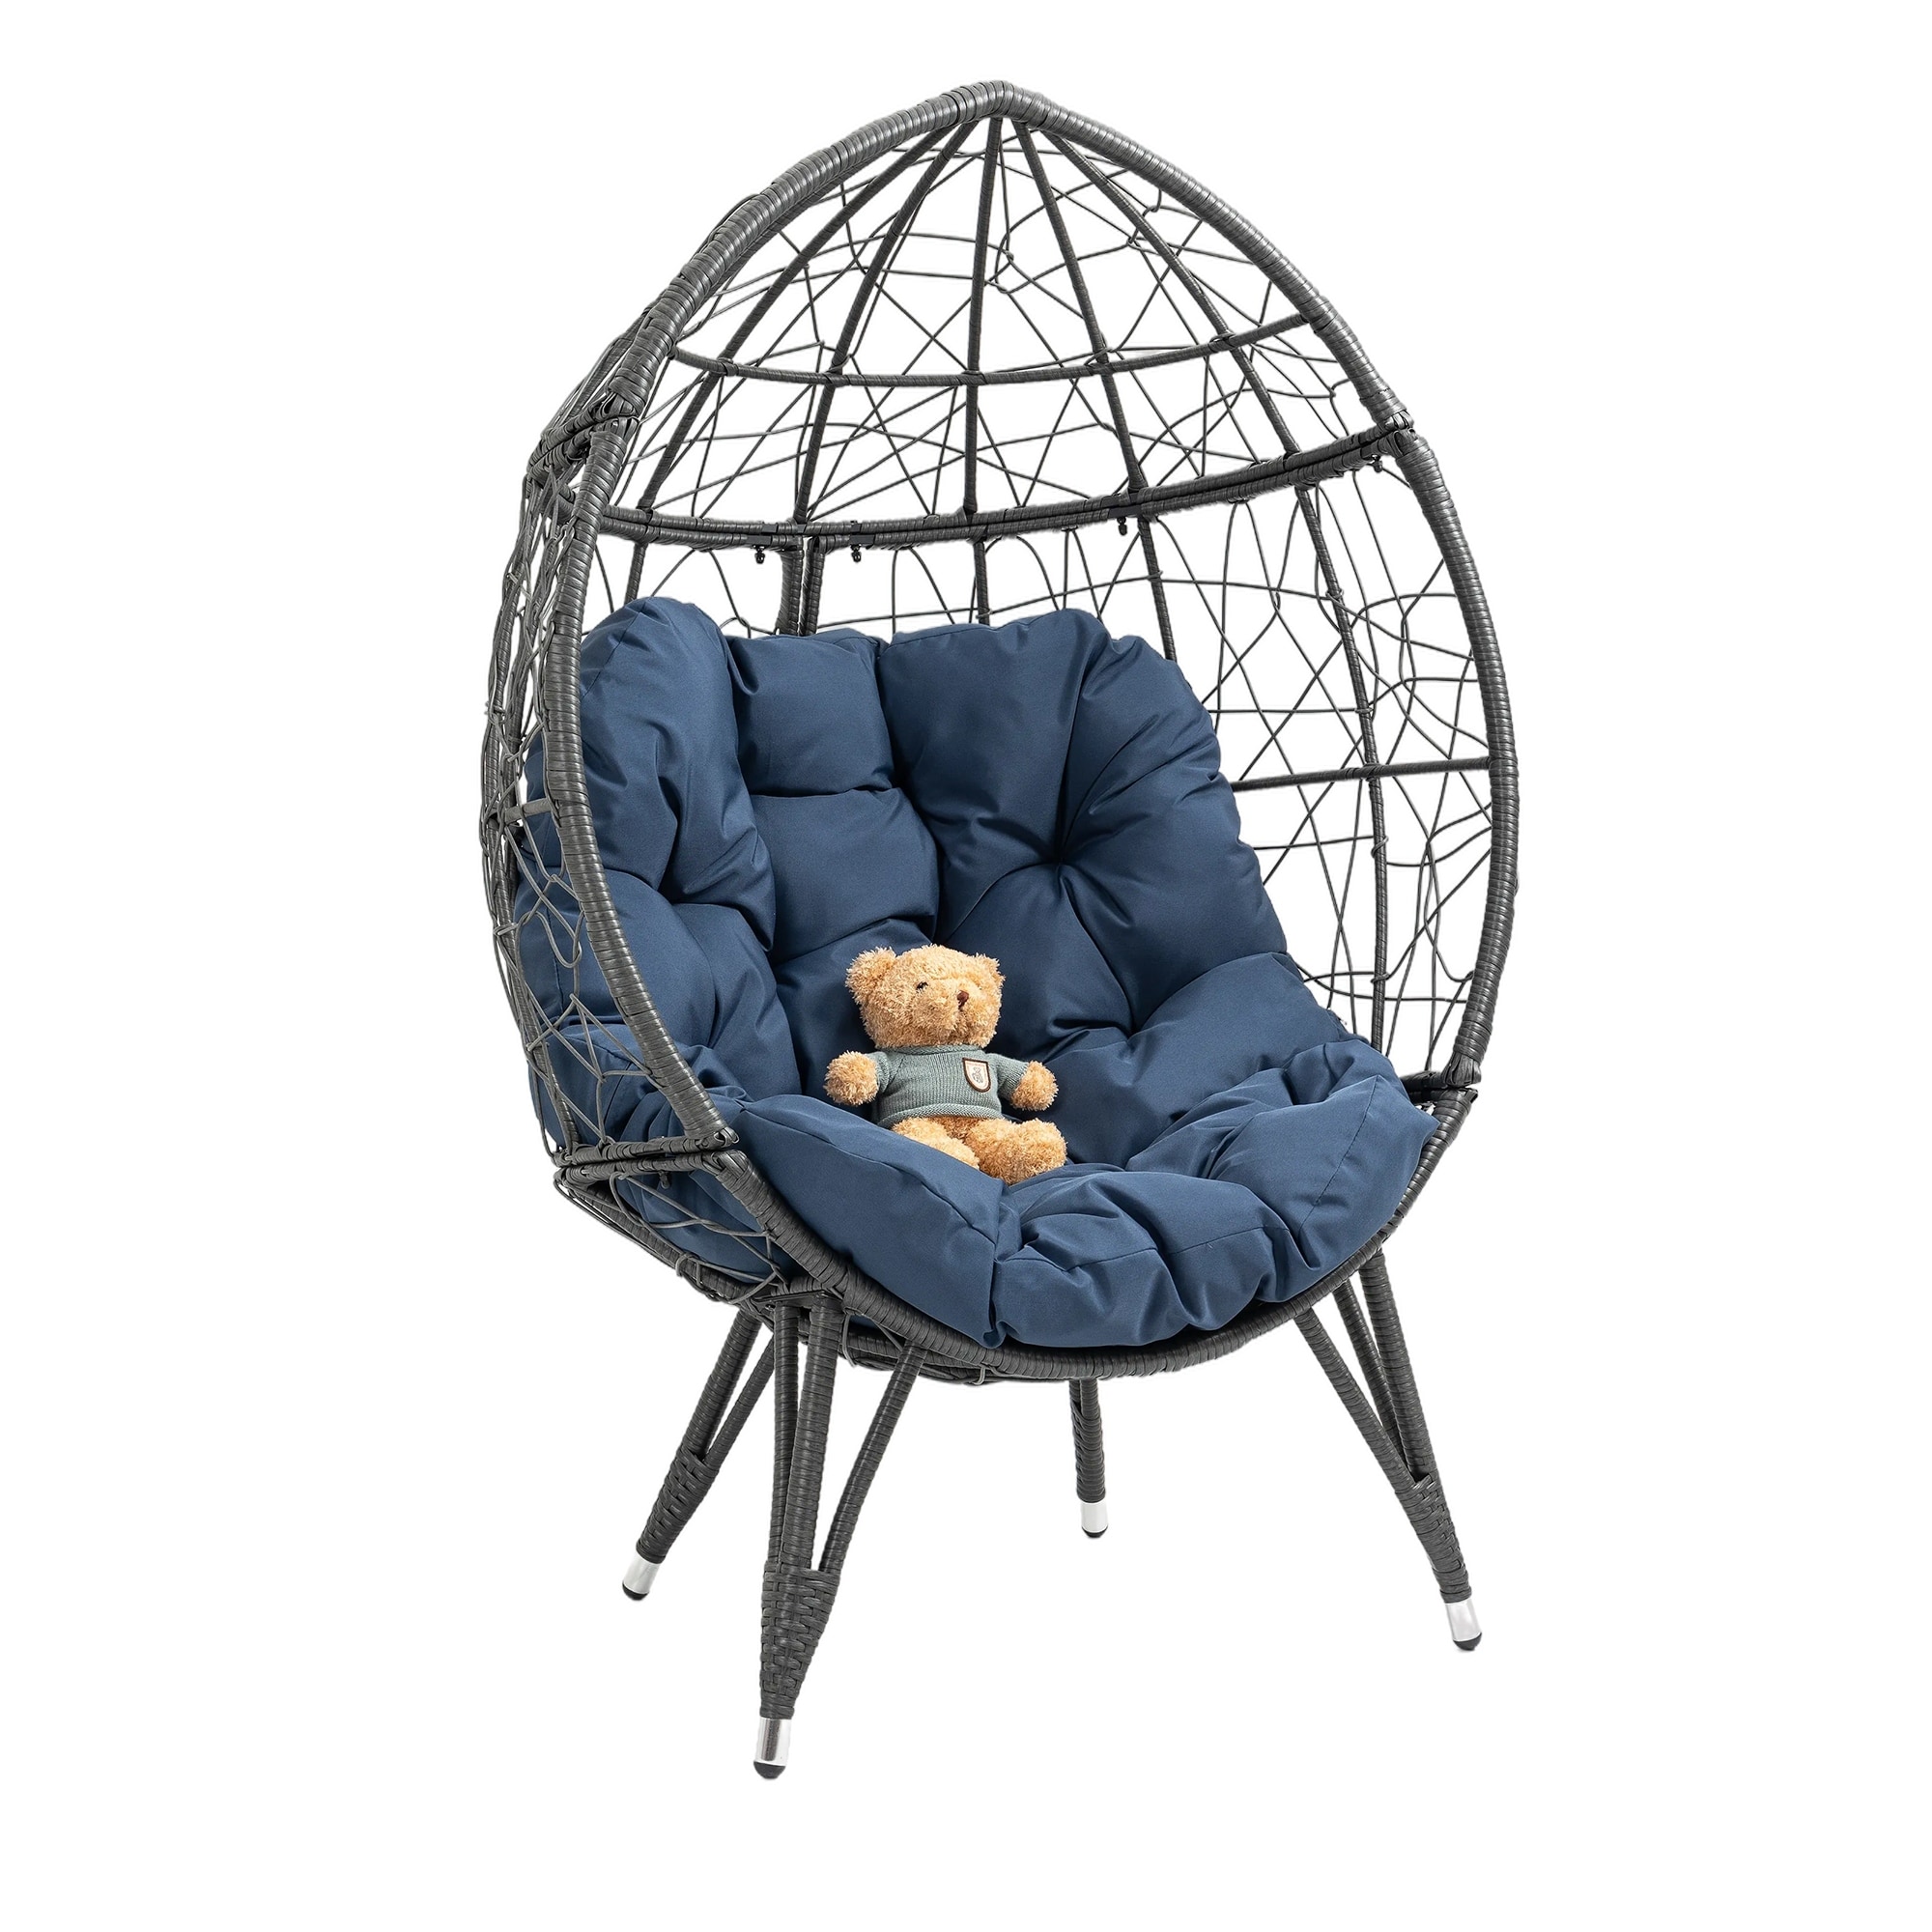 Outdoor Patio Wicker Egg Chair With Cushion Teddy Bear Included